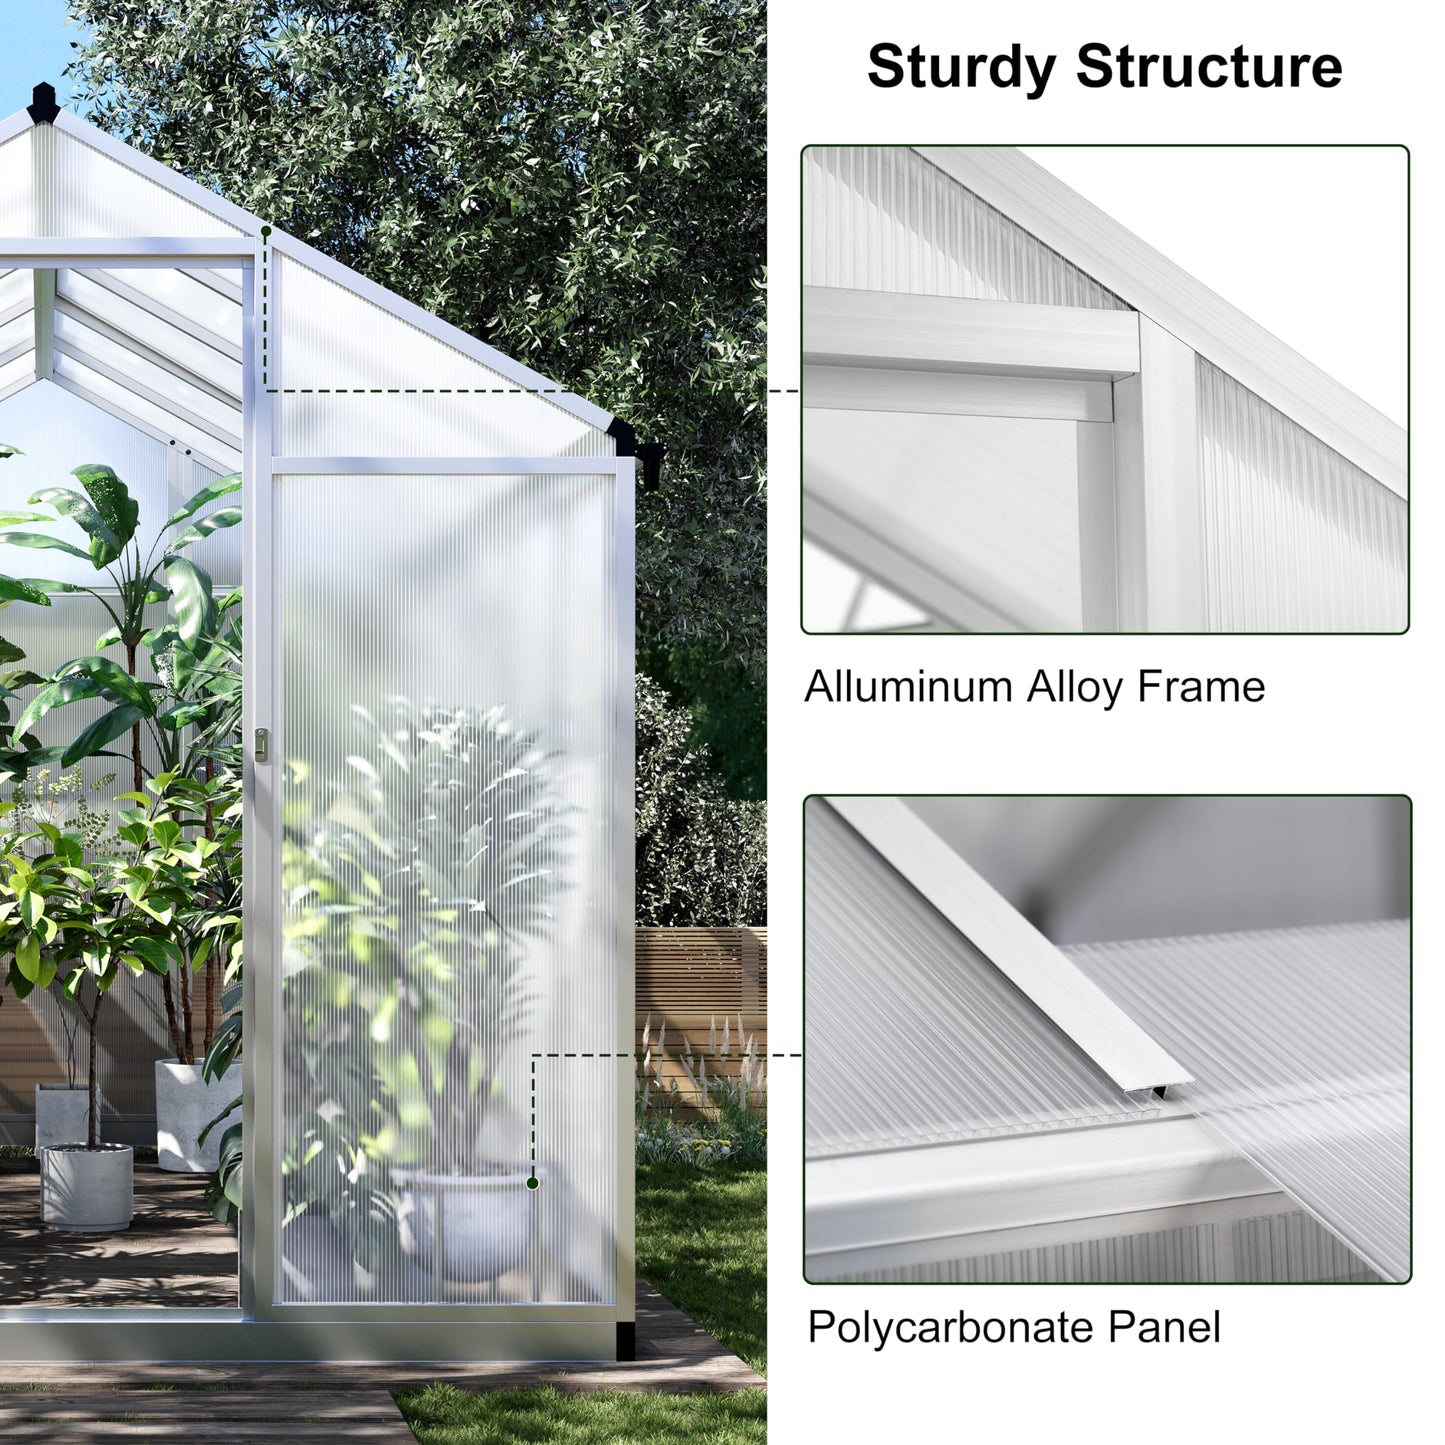 6x10 FT Greenhouse for Outdoors, Polycarbonate Greenhouse with Quick Setup Structure and Roof Vent, Aluminum Large Walk-in Greenhouse for Outside Garden Backyard, Silver